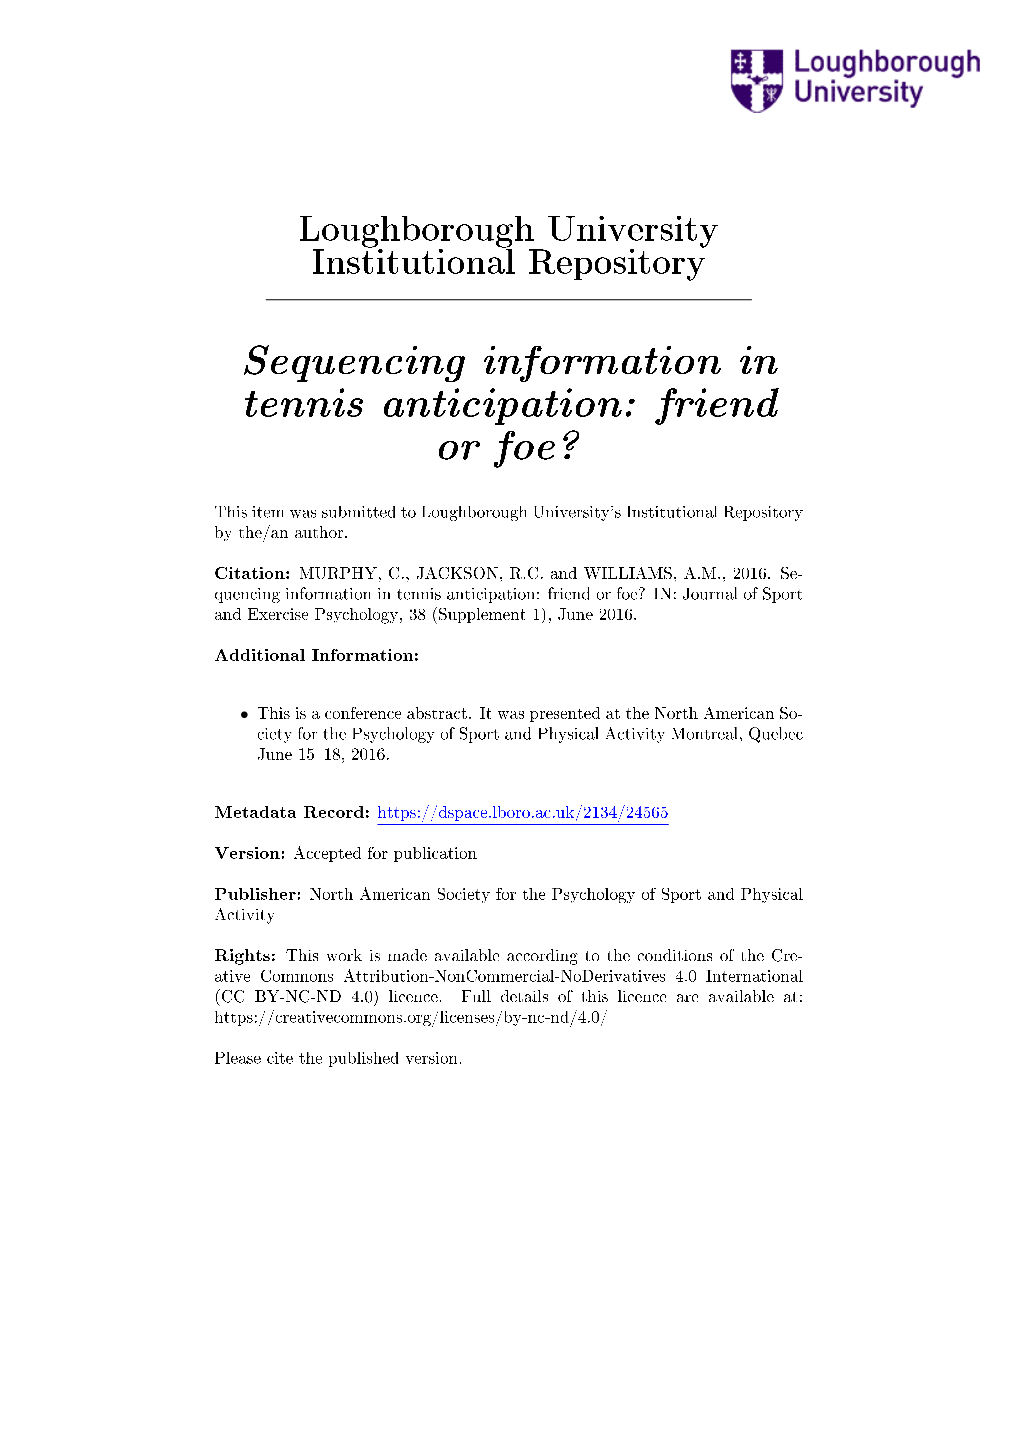 Sequencing Information in Tennis Anticipation: Friend Or Foe?